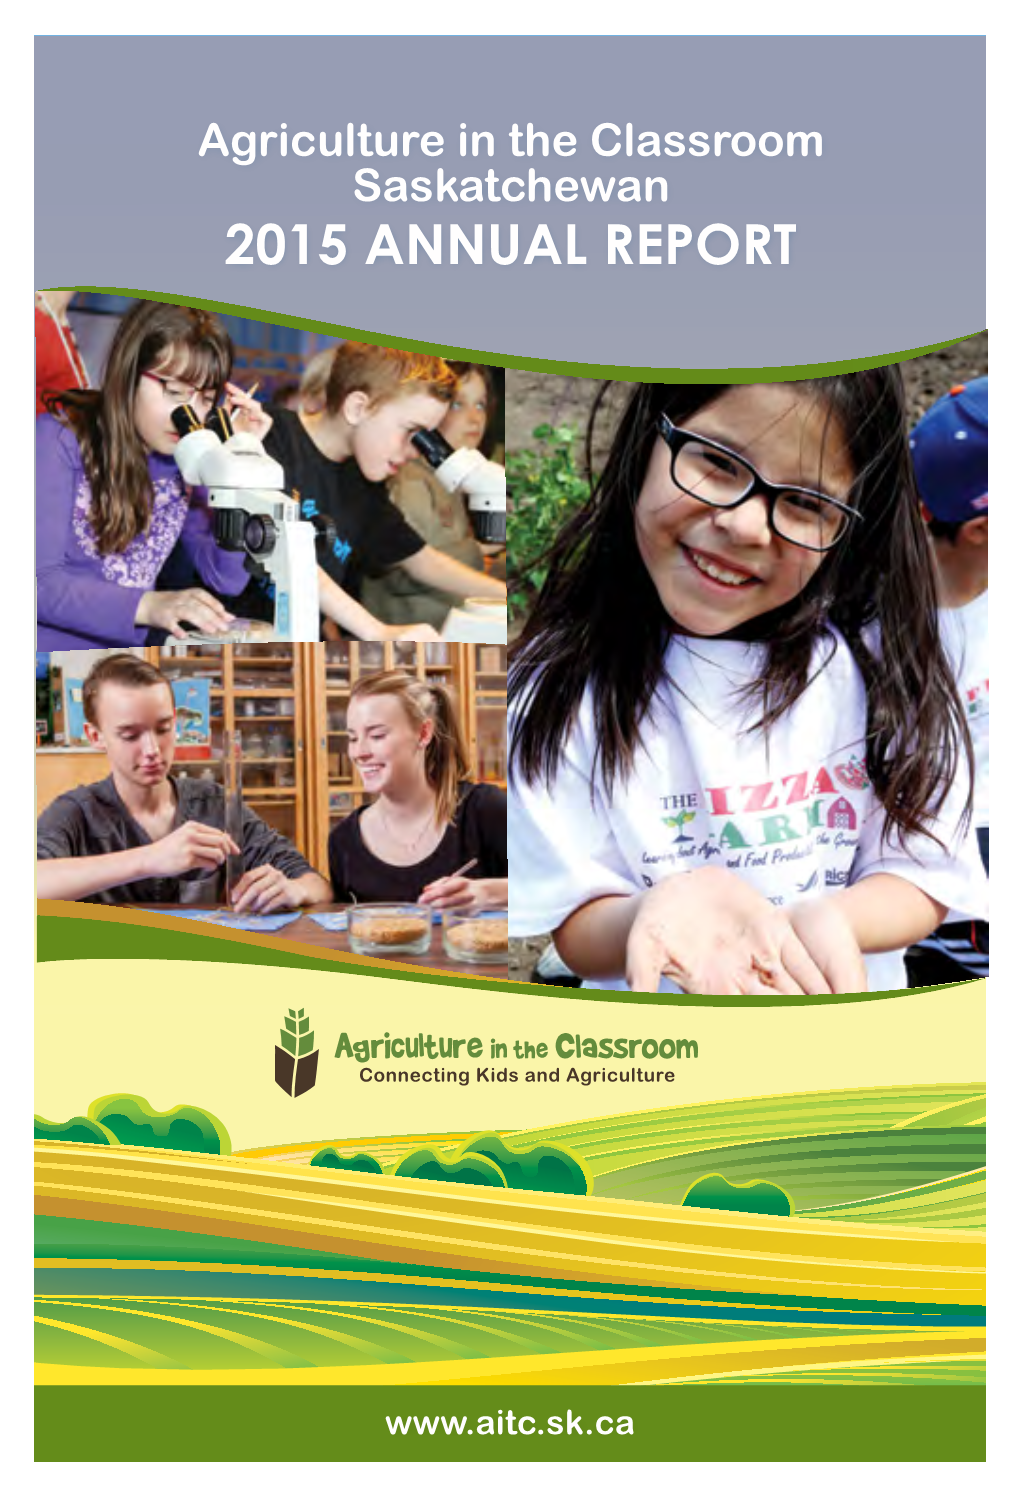 Agriculture in the Classroom Saskatchewan 2015 ANNUAL REPORT